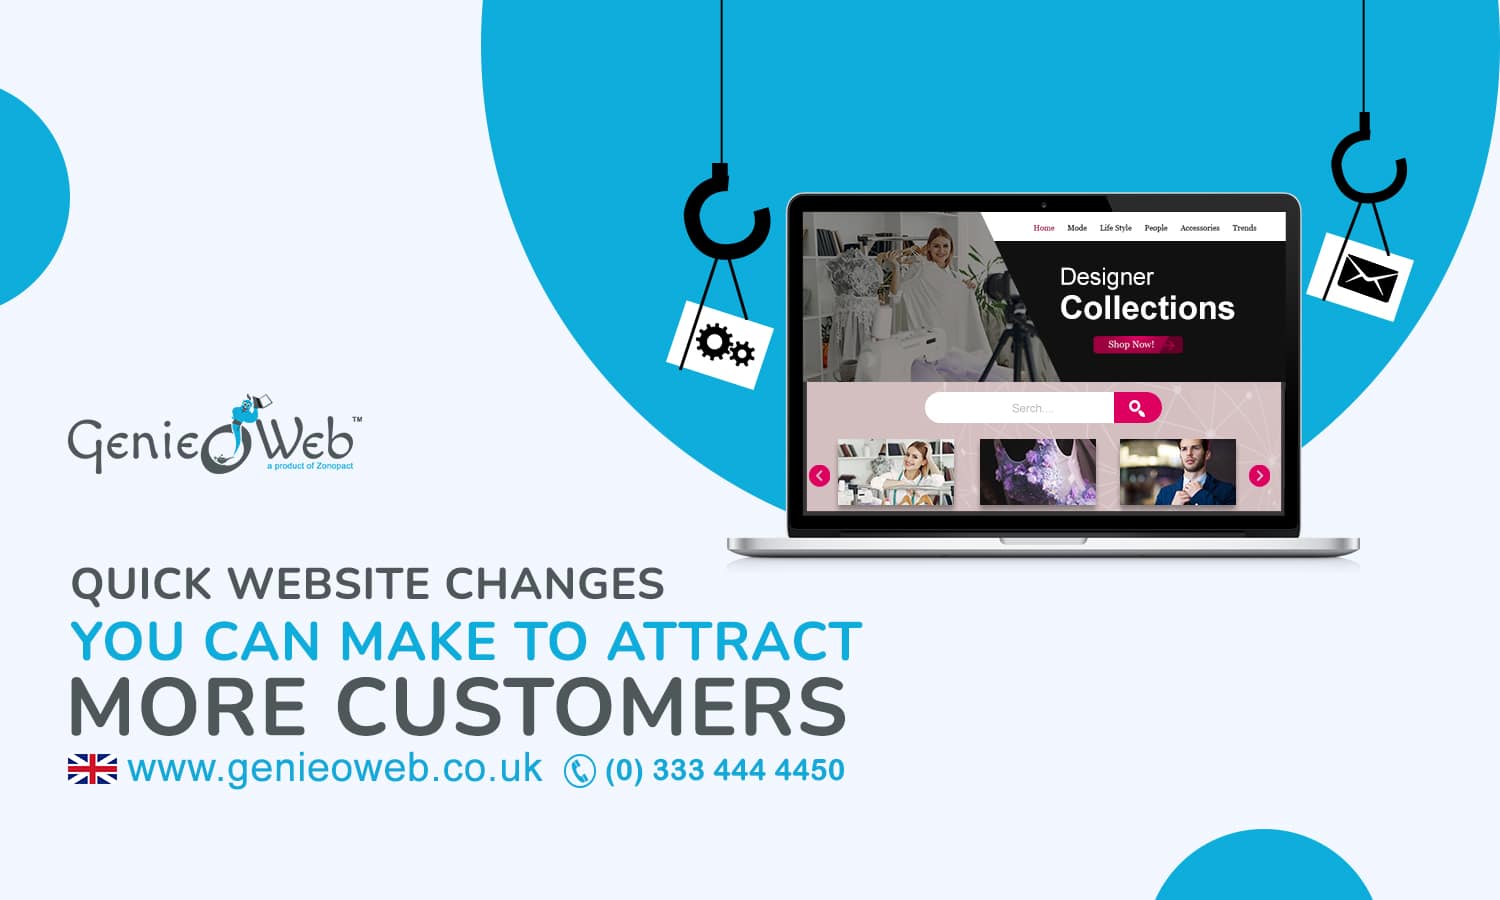 Quick Website Changes You Can Make to Attract More Customers